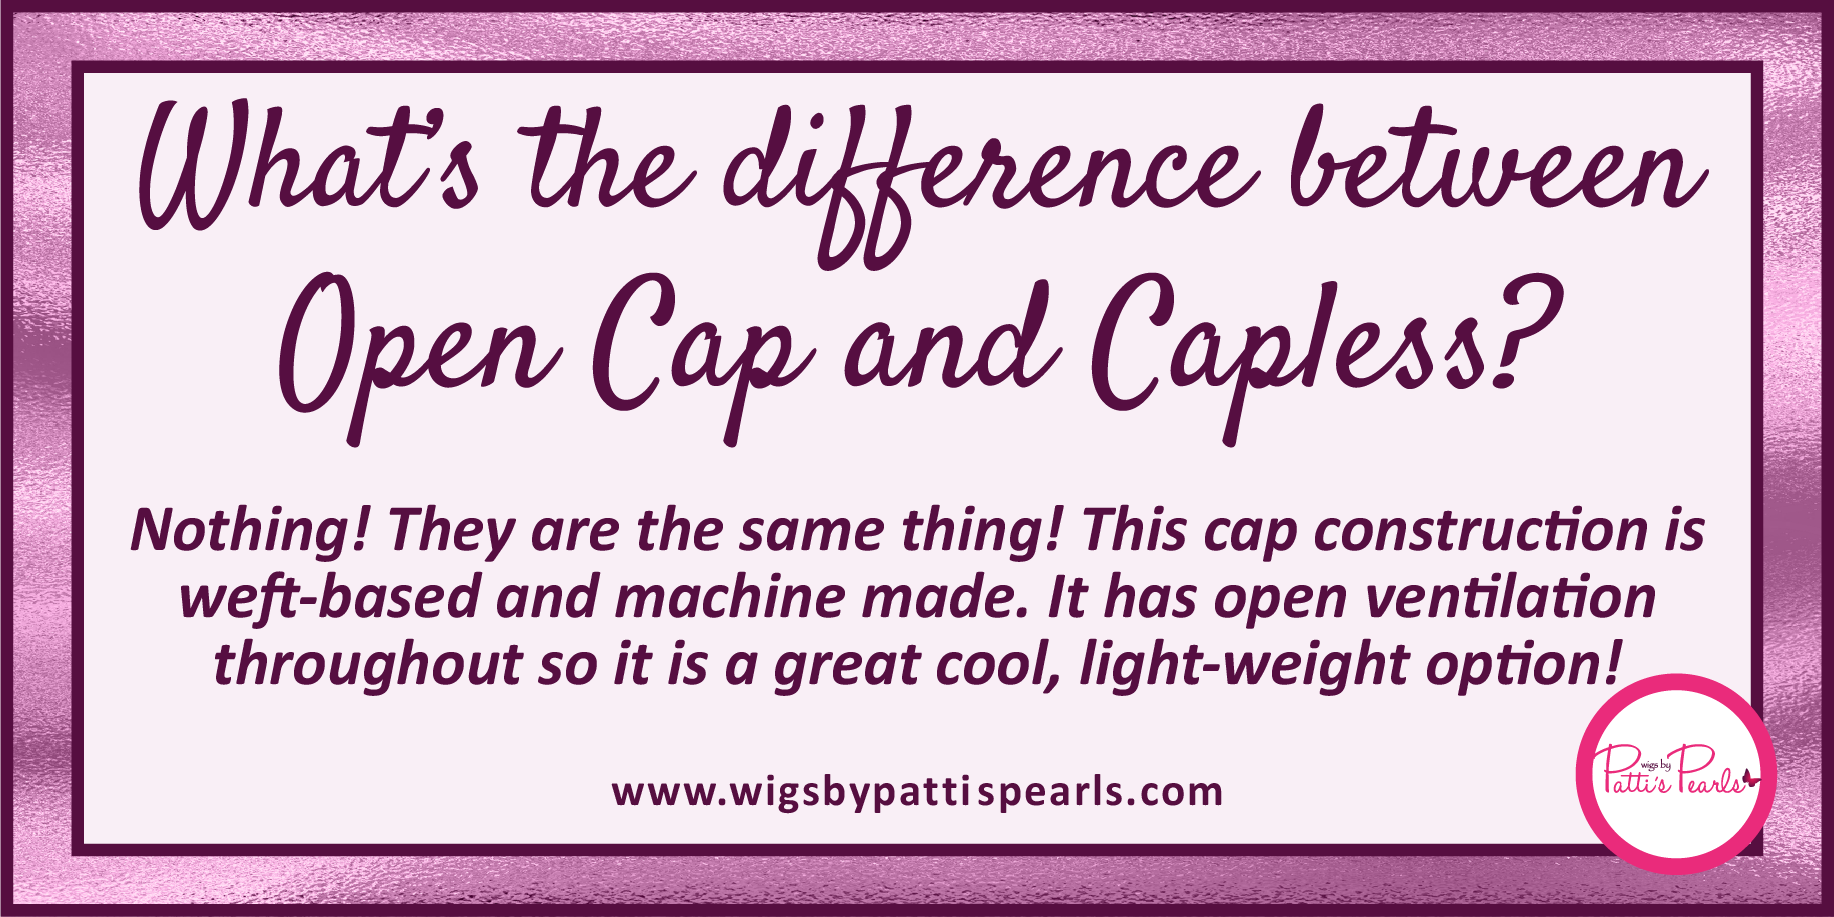 #WigTermTuesday What's the Difference Between Open Cap and Capless?